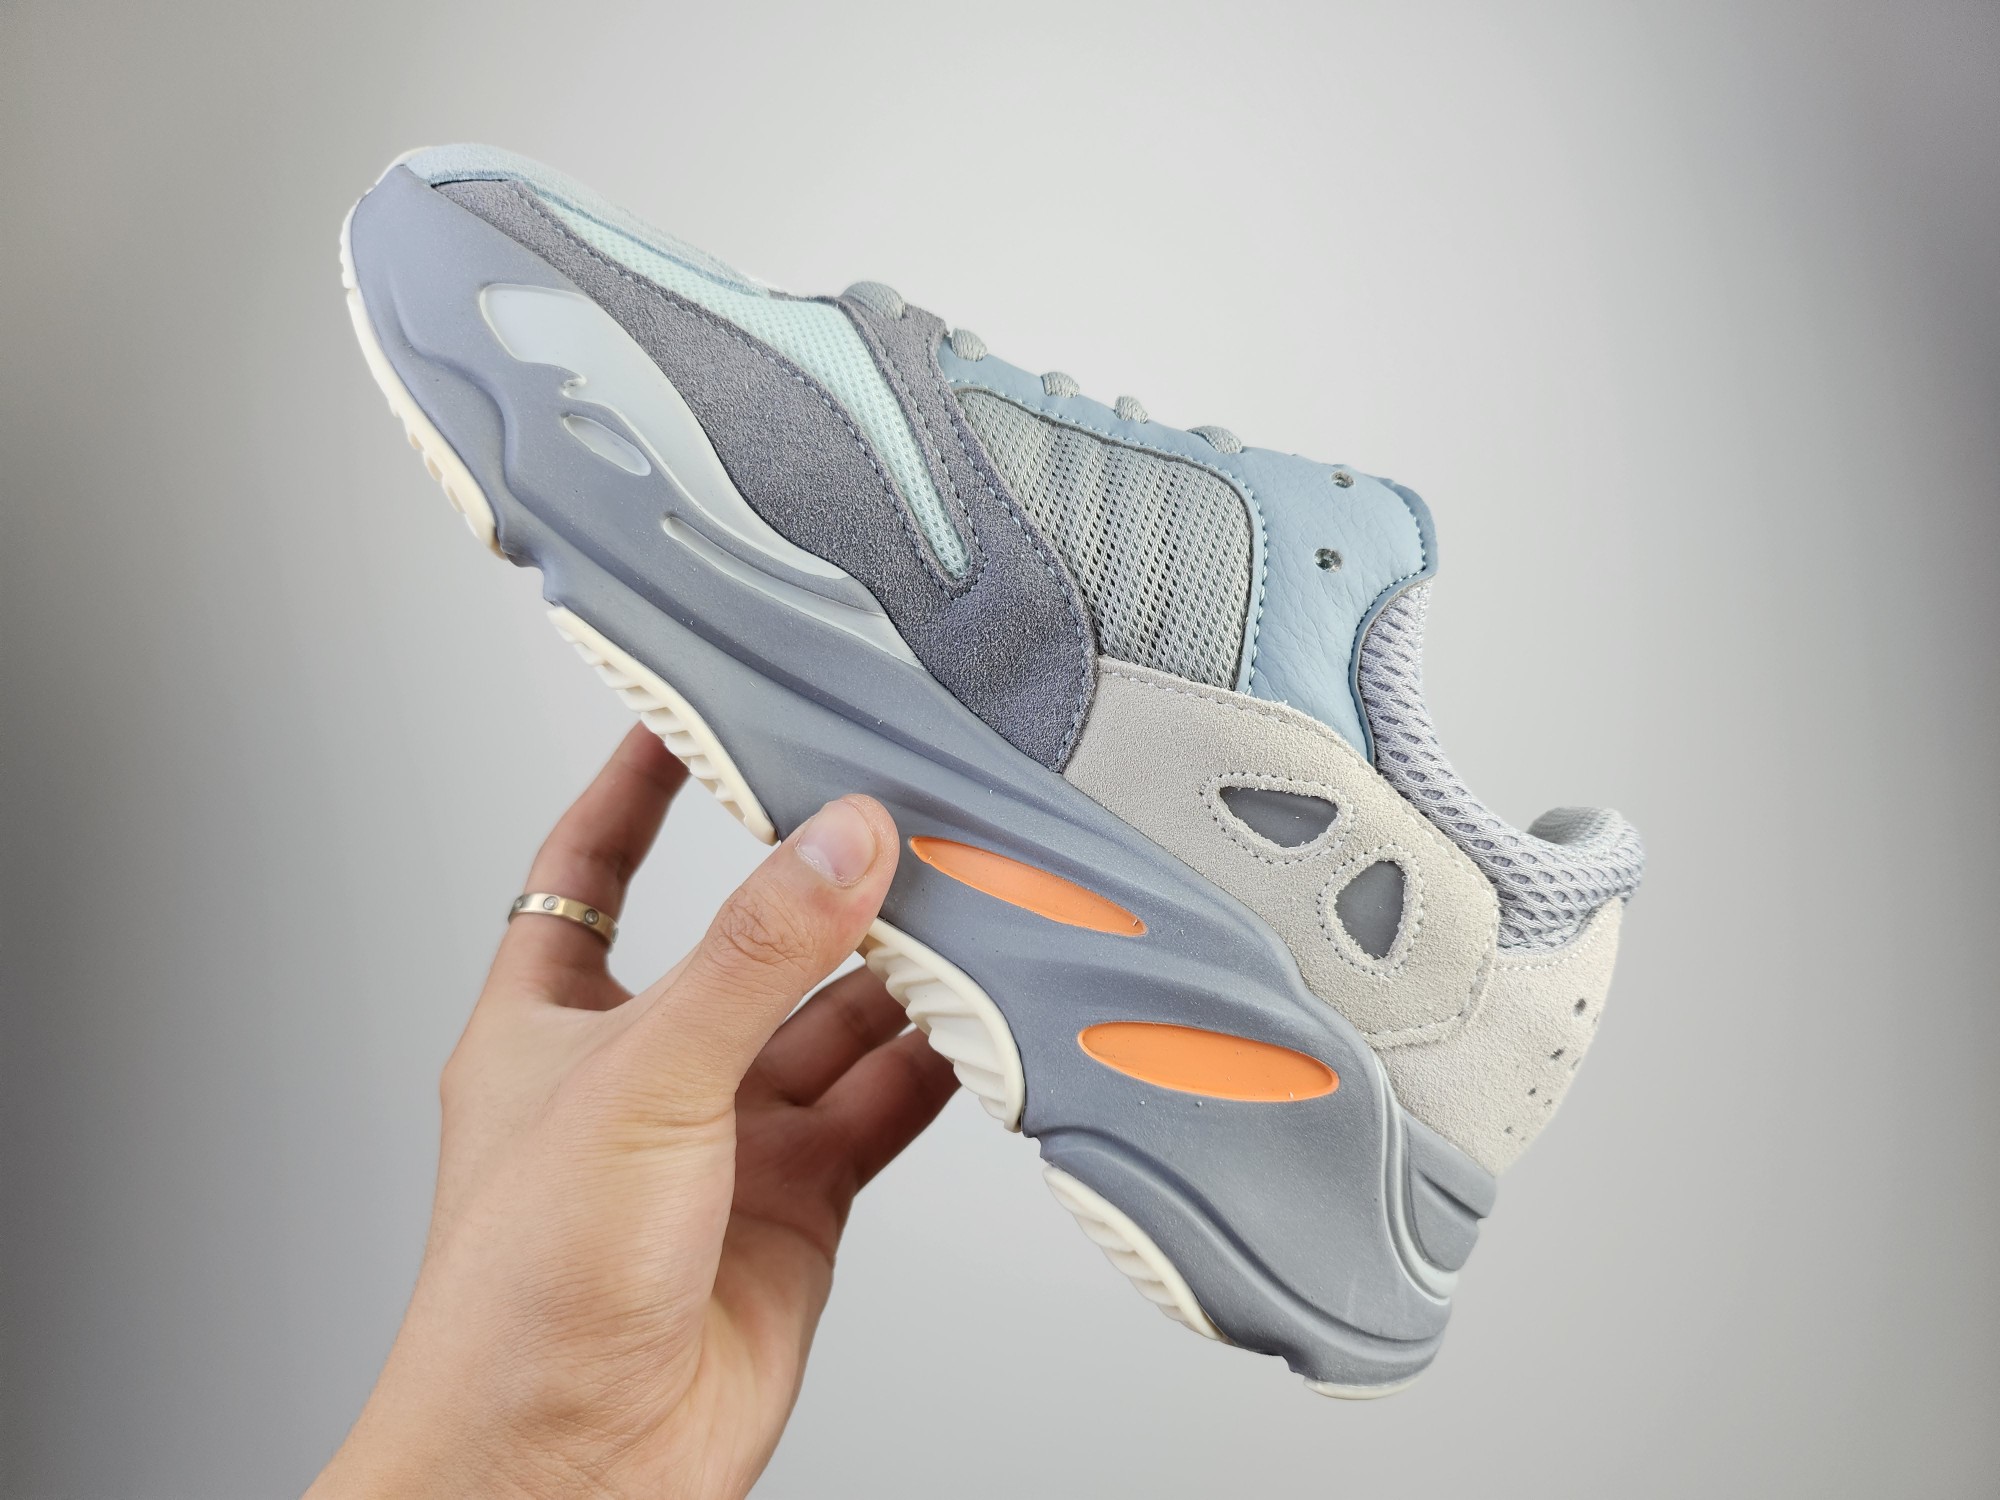 Adidas Yeezy Boost 700 V2 Sneakers Unisex # 270124, cheap Adidas Yeezy Shoes, only $89!